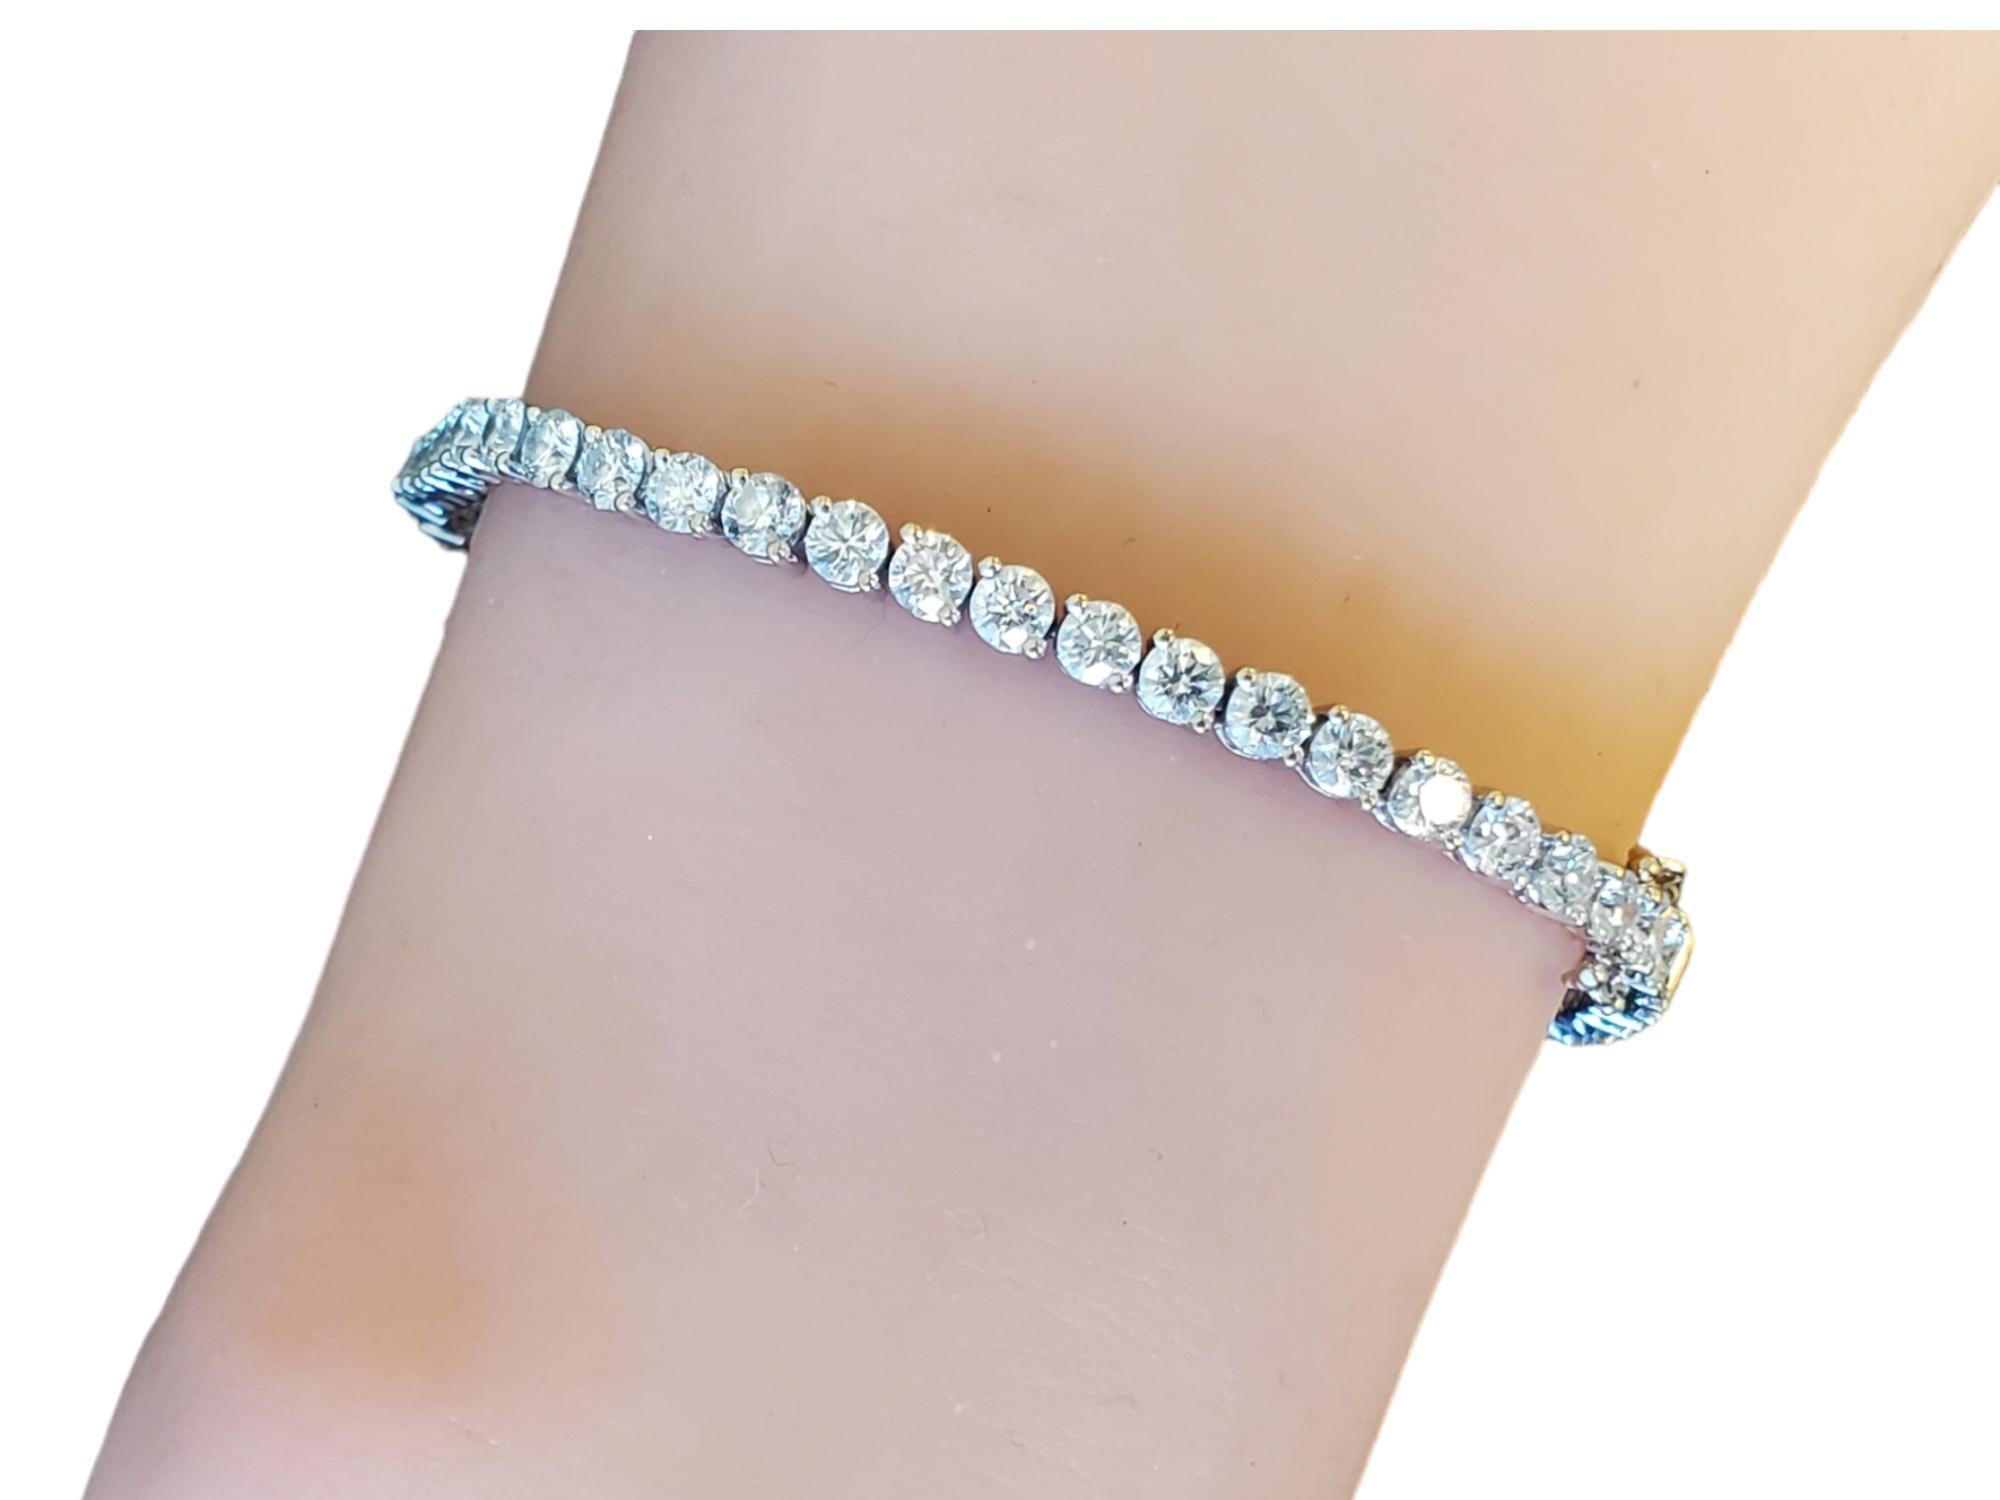 18K Diamond Tennis Bracelet 7.5tcw

Listed is this classic and timeless 18k diamond line bracelet with white vs diamonds. The bracelet features 7.5tcw of good size diamonds approximately 3.3mm ea, The round brilliant diamonds are FG color and VS